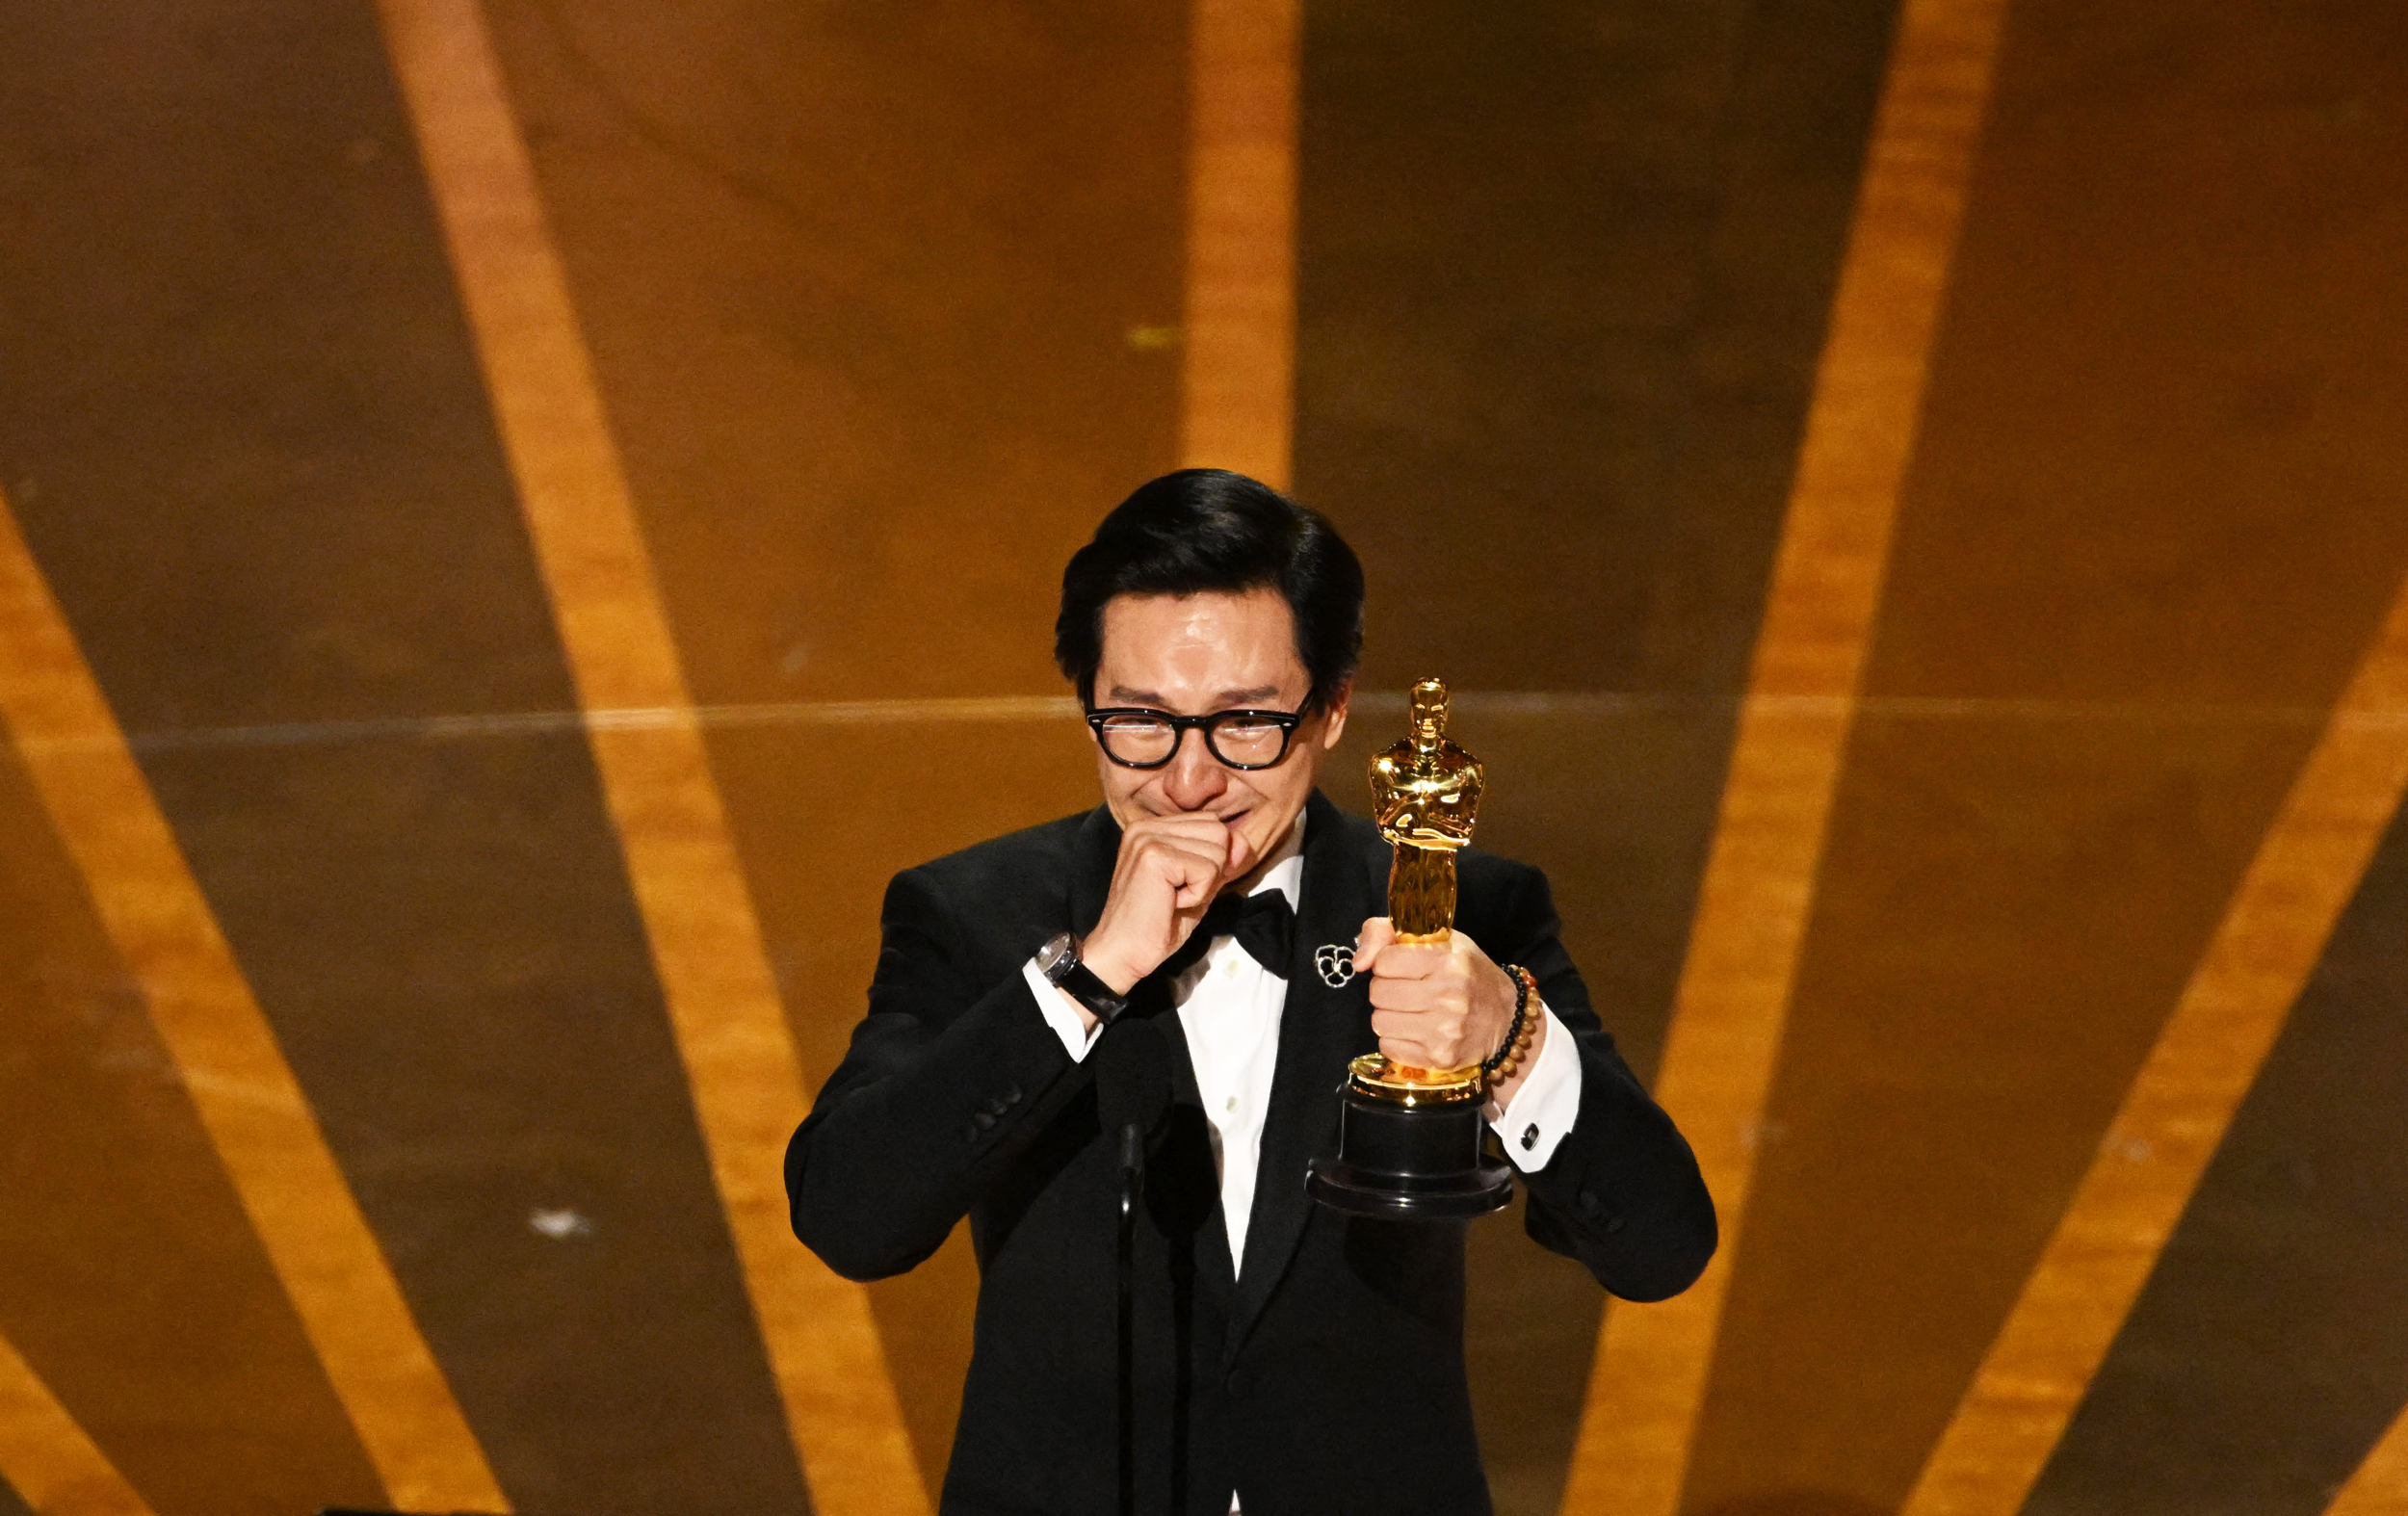 US-Vietnamese actor Ke Huy Quan accepts the Oscar for Best Actor in a Supporting Role for "Everything Everywhere All at Once" onstage during the 95th Annual Academy Awards at the Dolby Theatre in Hollywood, California on March 12, 2023. (Photo by Patrick T. Fallon / AFP) (Photo by PATRICK T. FALLON/AFP via Getty Images)